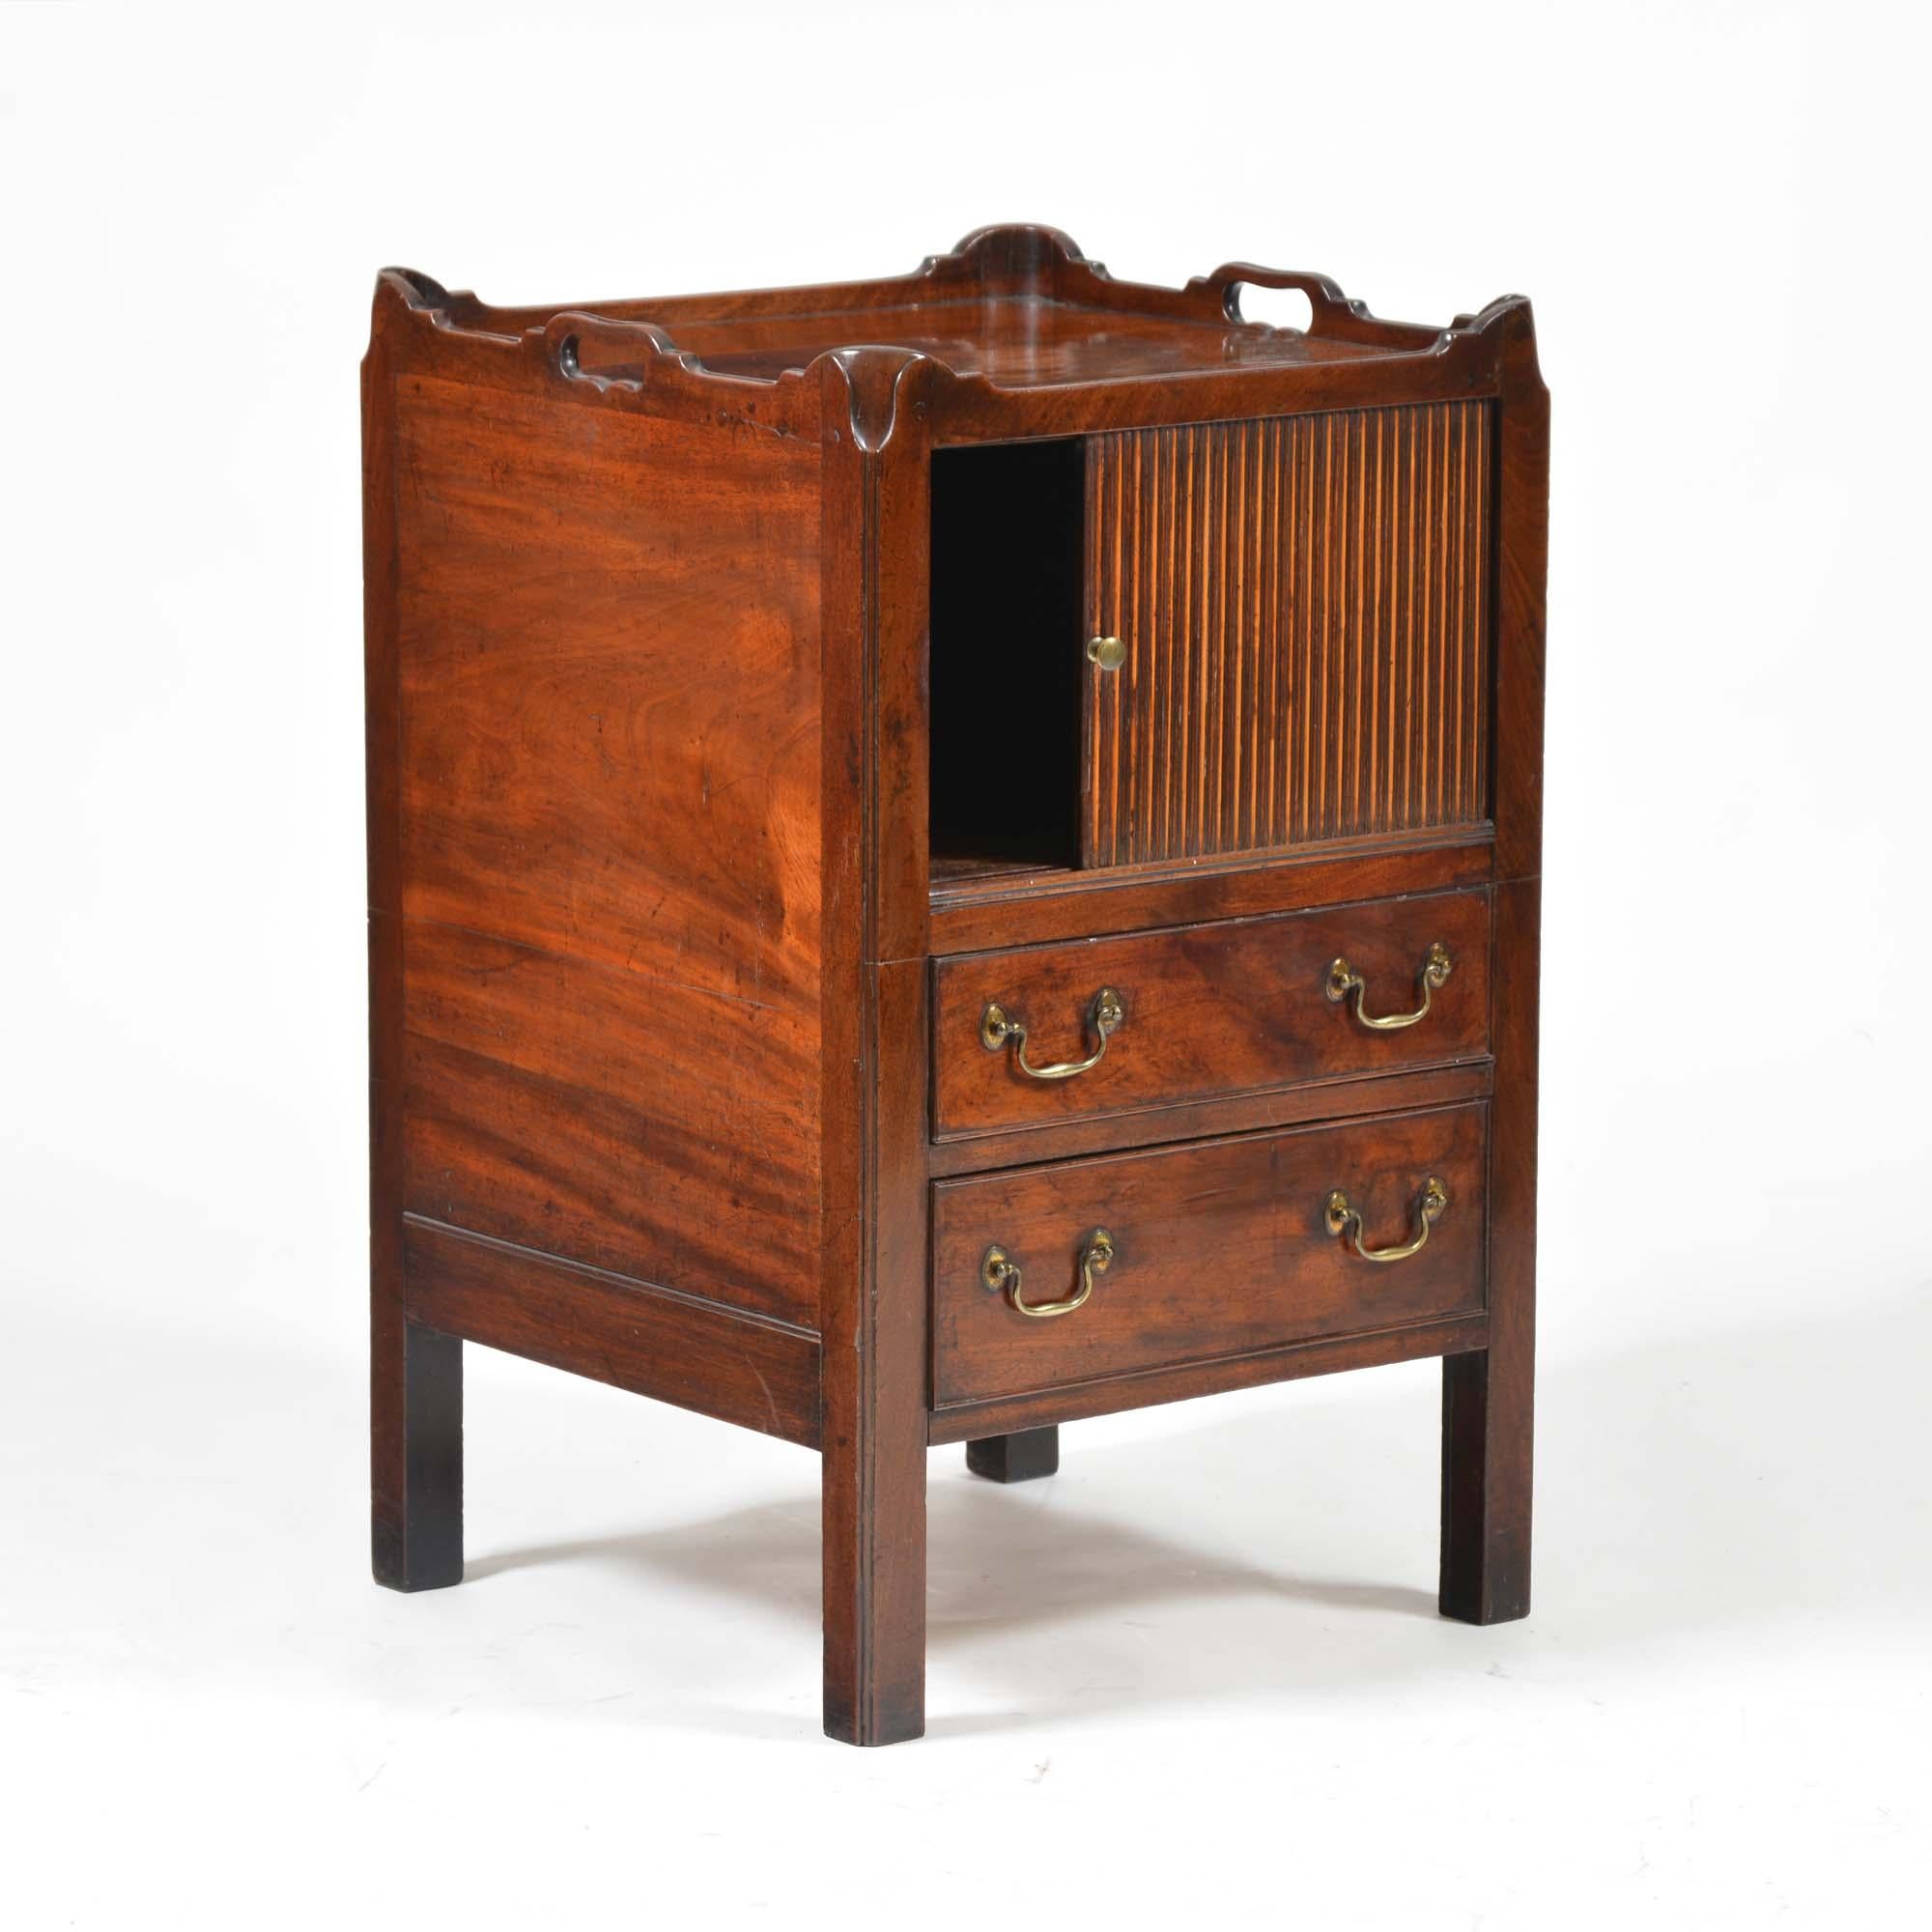 Georgian mahogany tray-top commode, the raised gallery pierced to the sides to form a pair of carrying handles. The inset top of well figured flame mahogany over a sliding tambour door above a pair of drawers with cock-beading and each with a pair